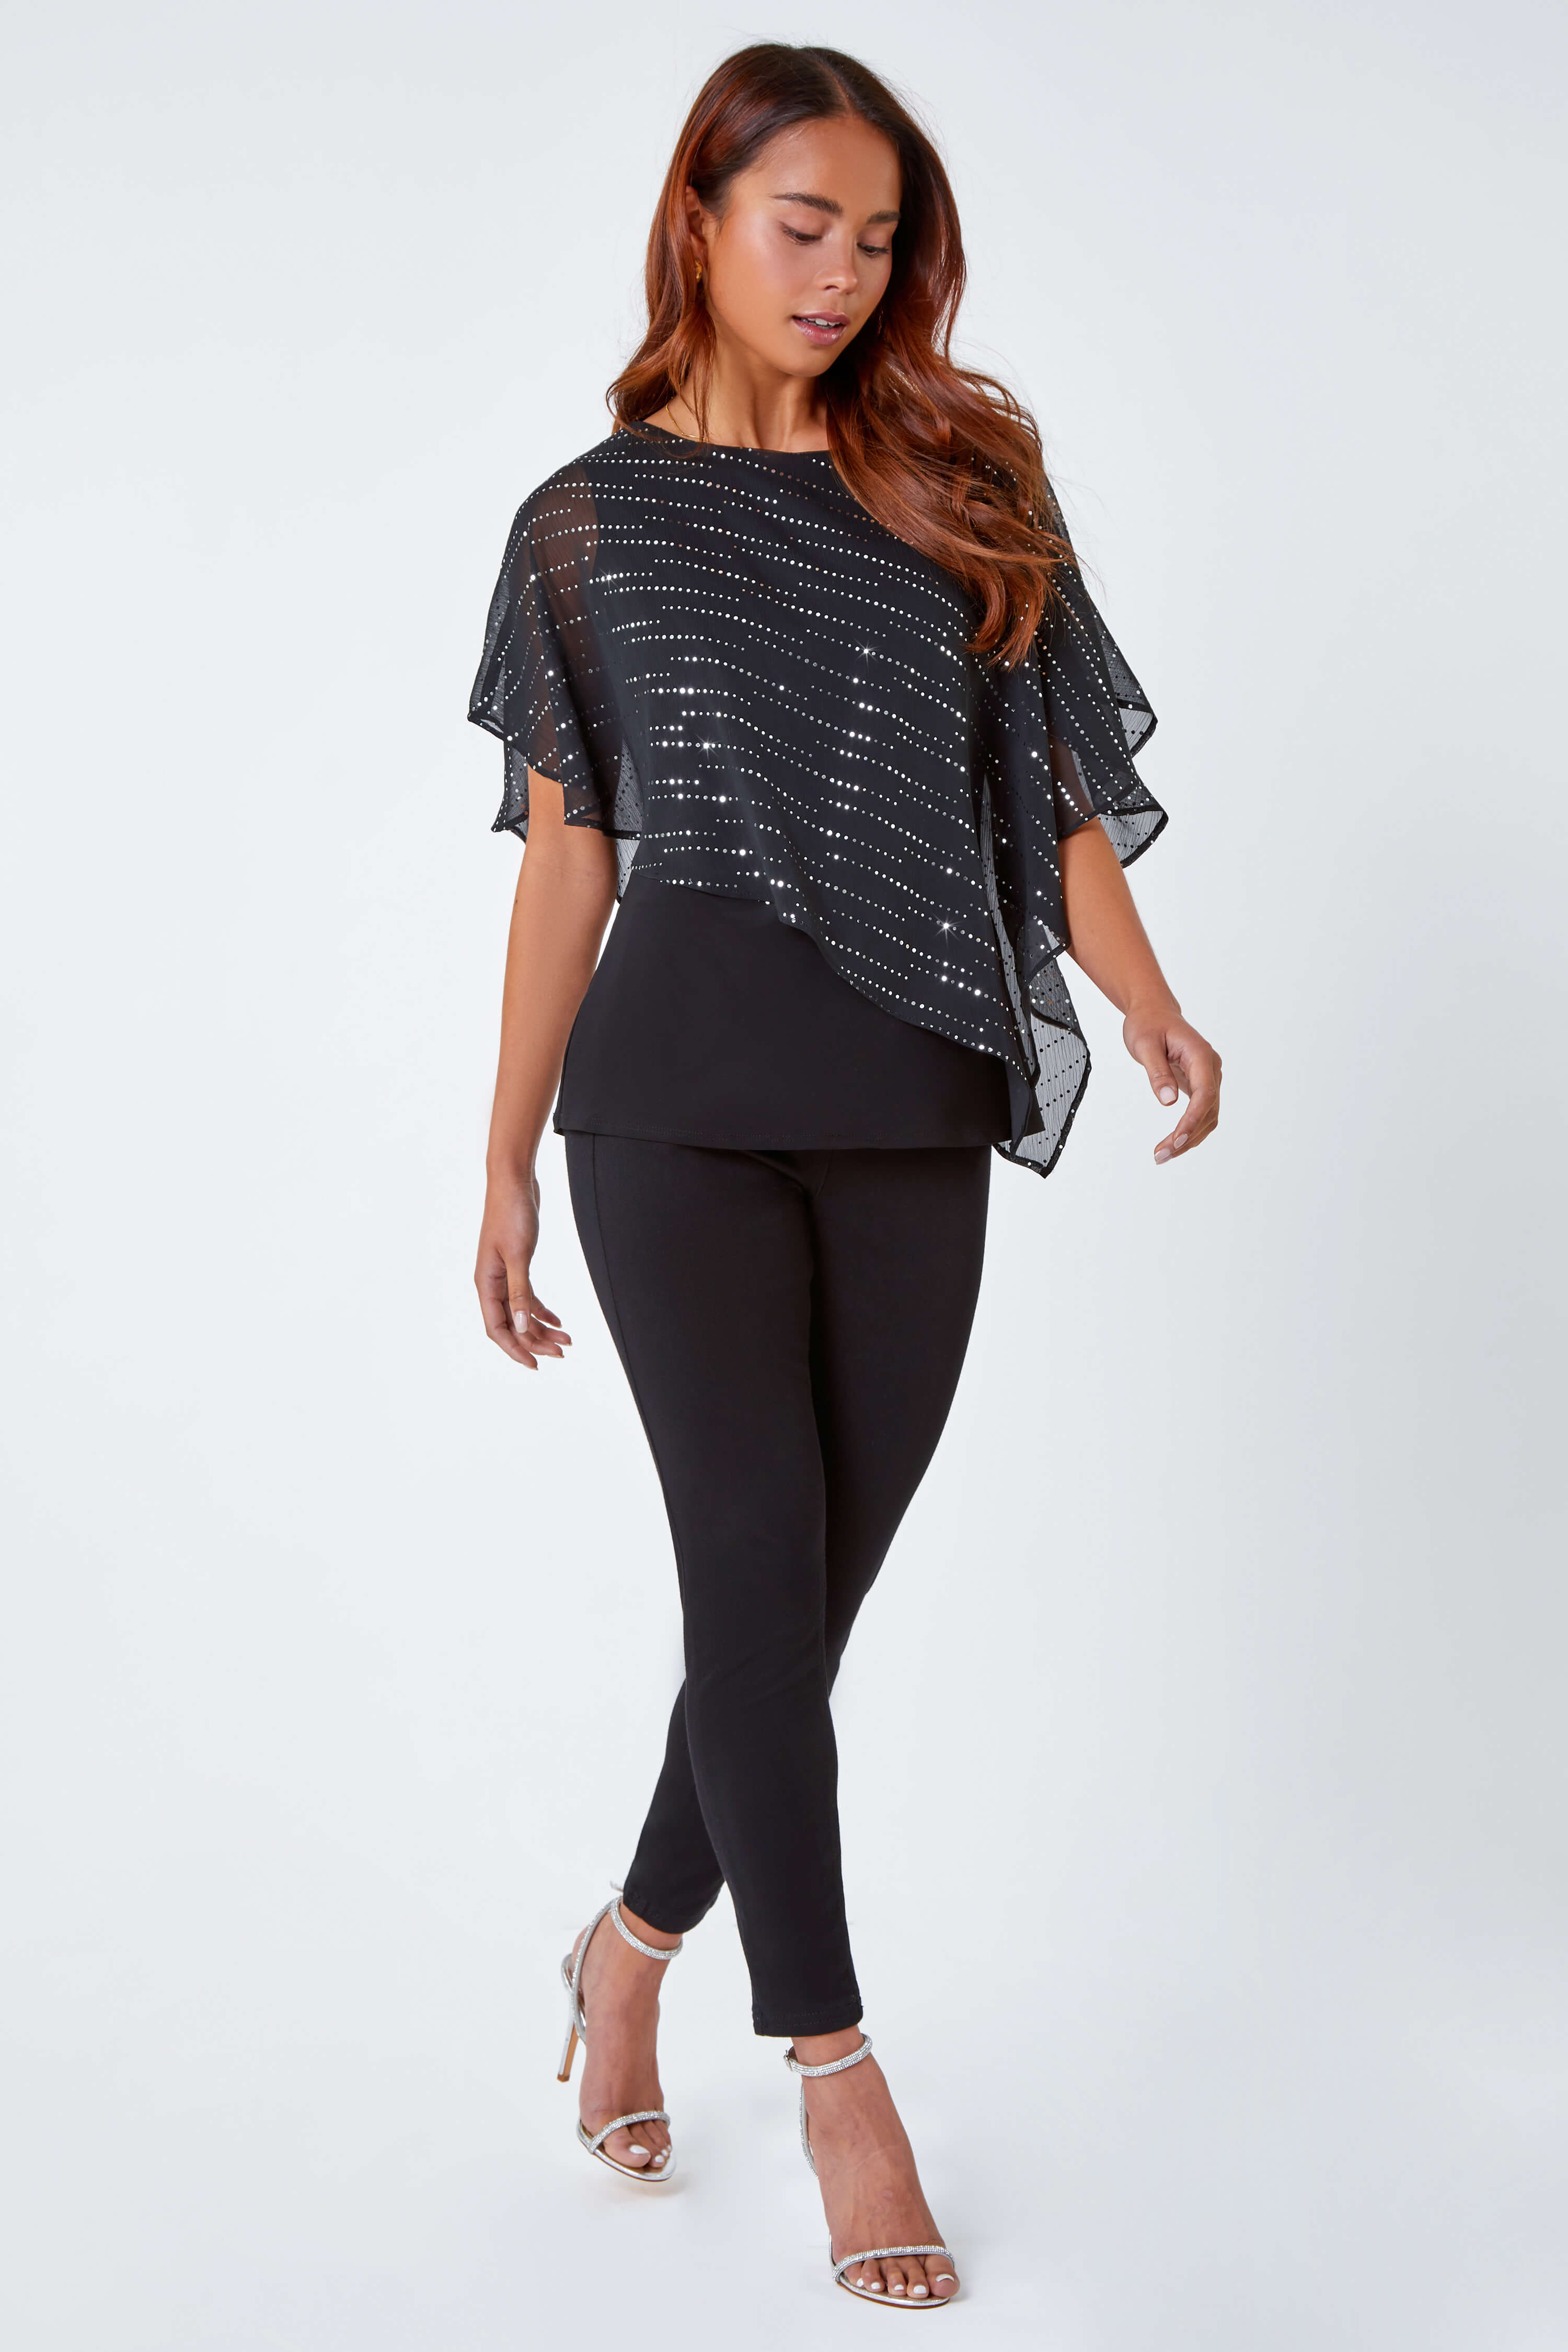 Petite Shimmer Chiffon Overlay Stretch Top